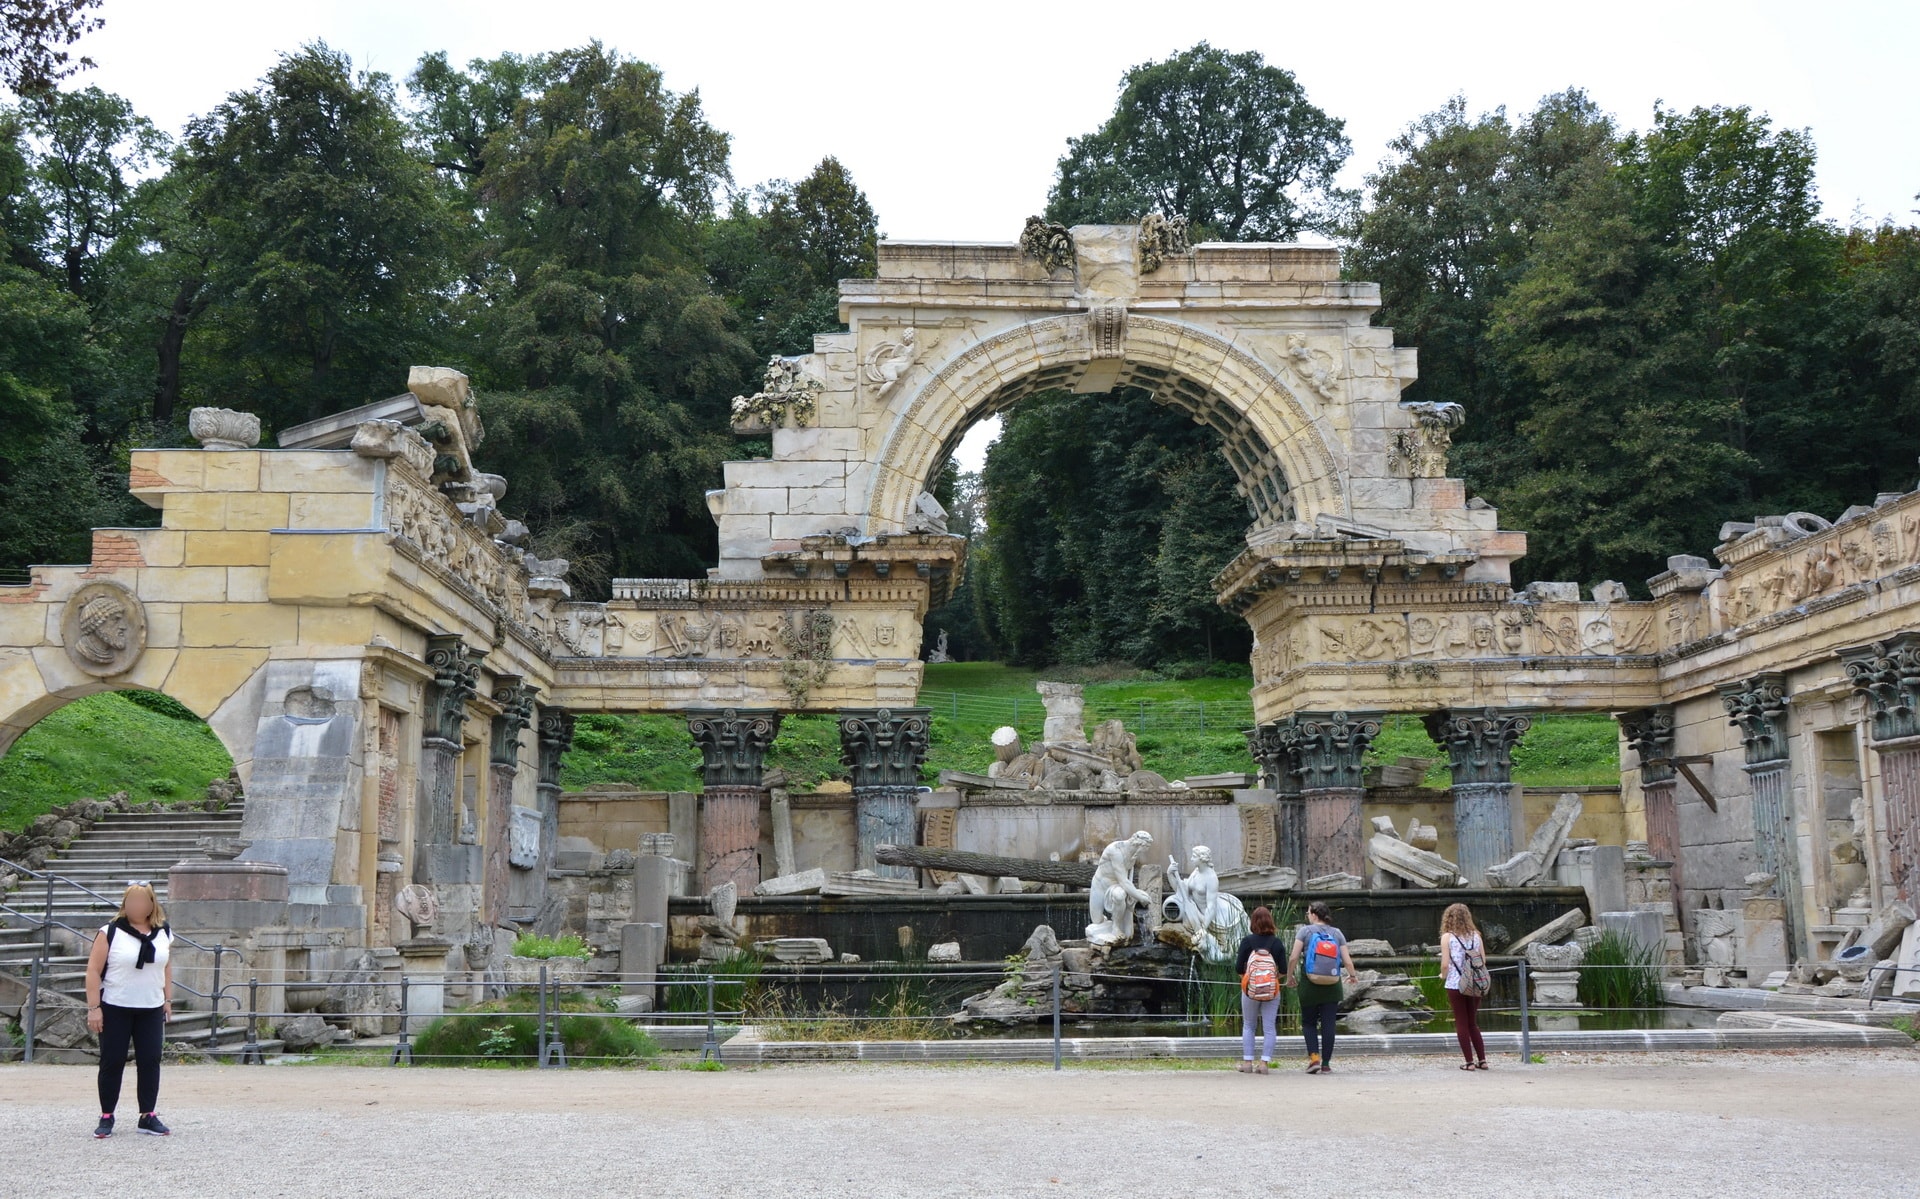 The Roman Ruins structure was created in this state as a model of the Roman temple of Vespasian and Titus